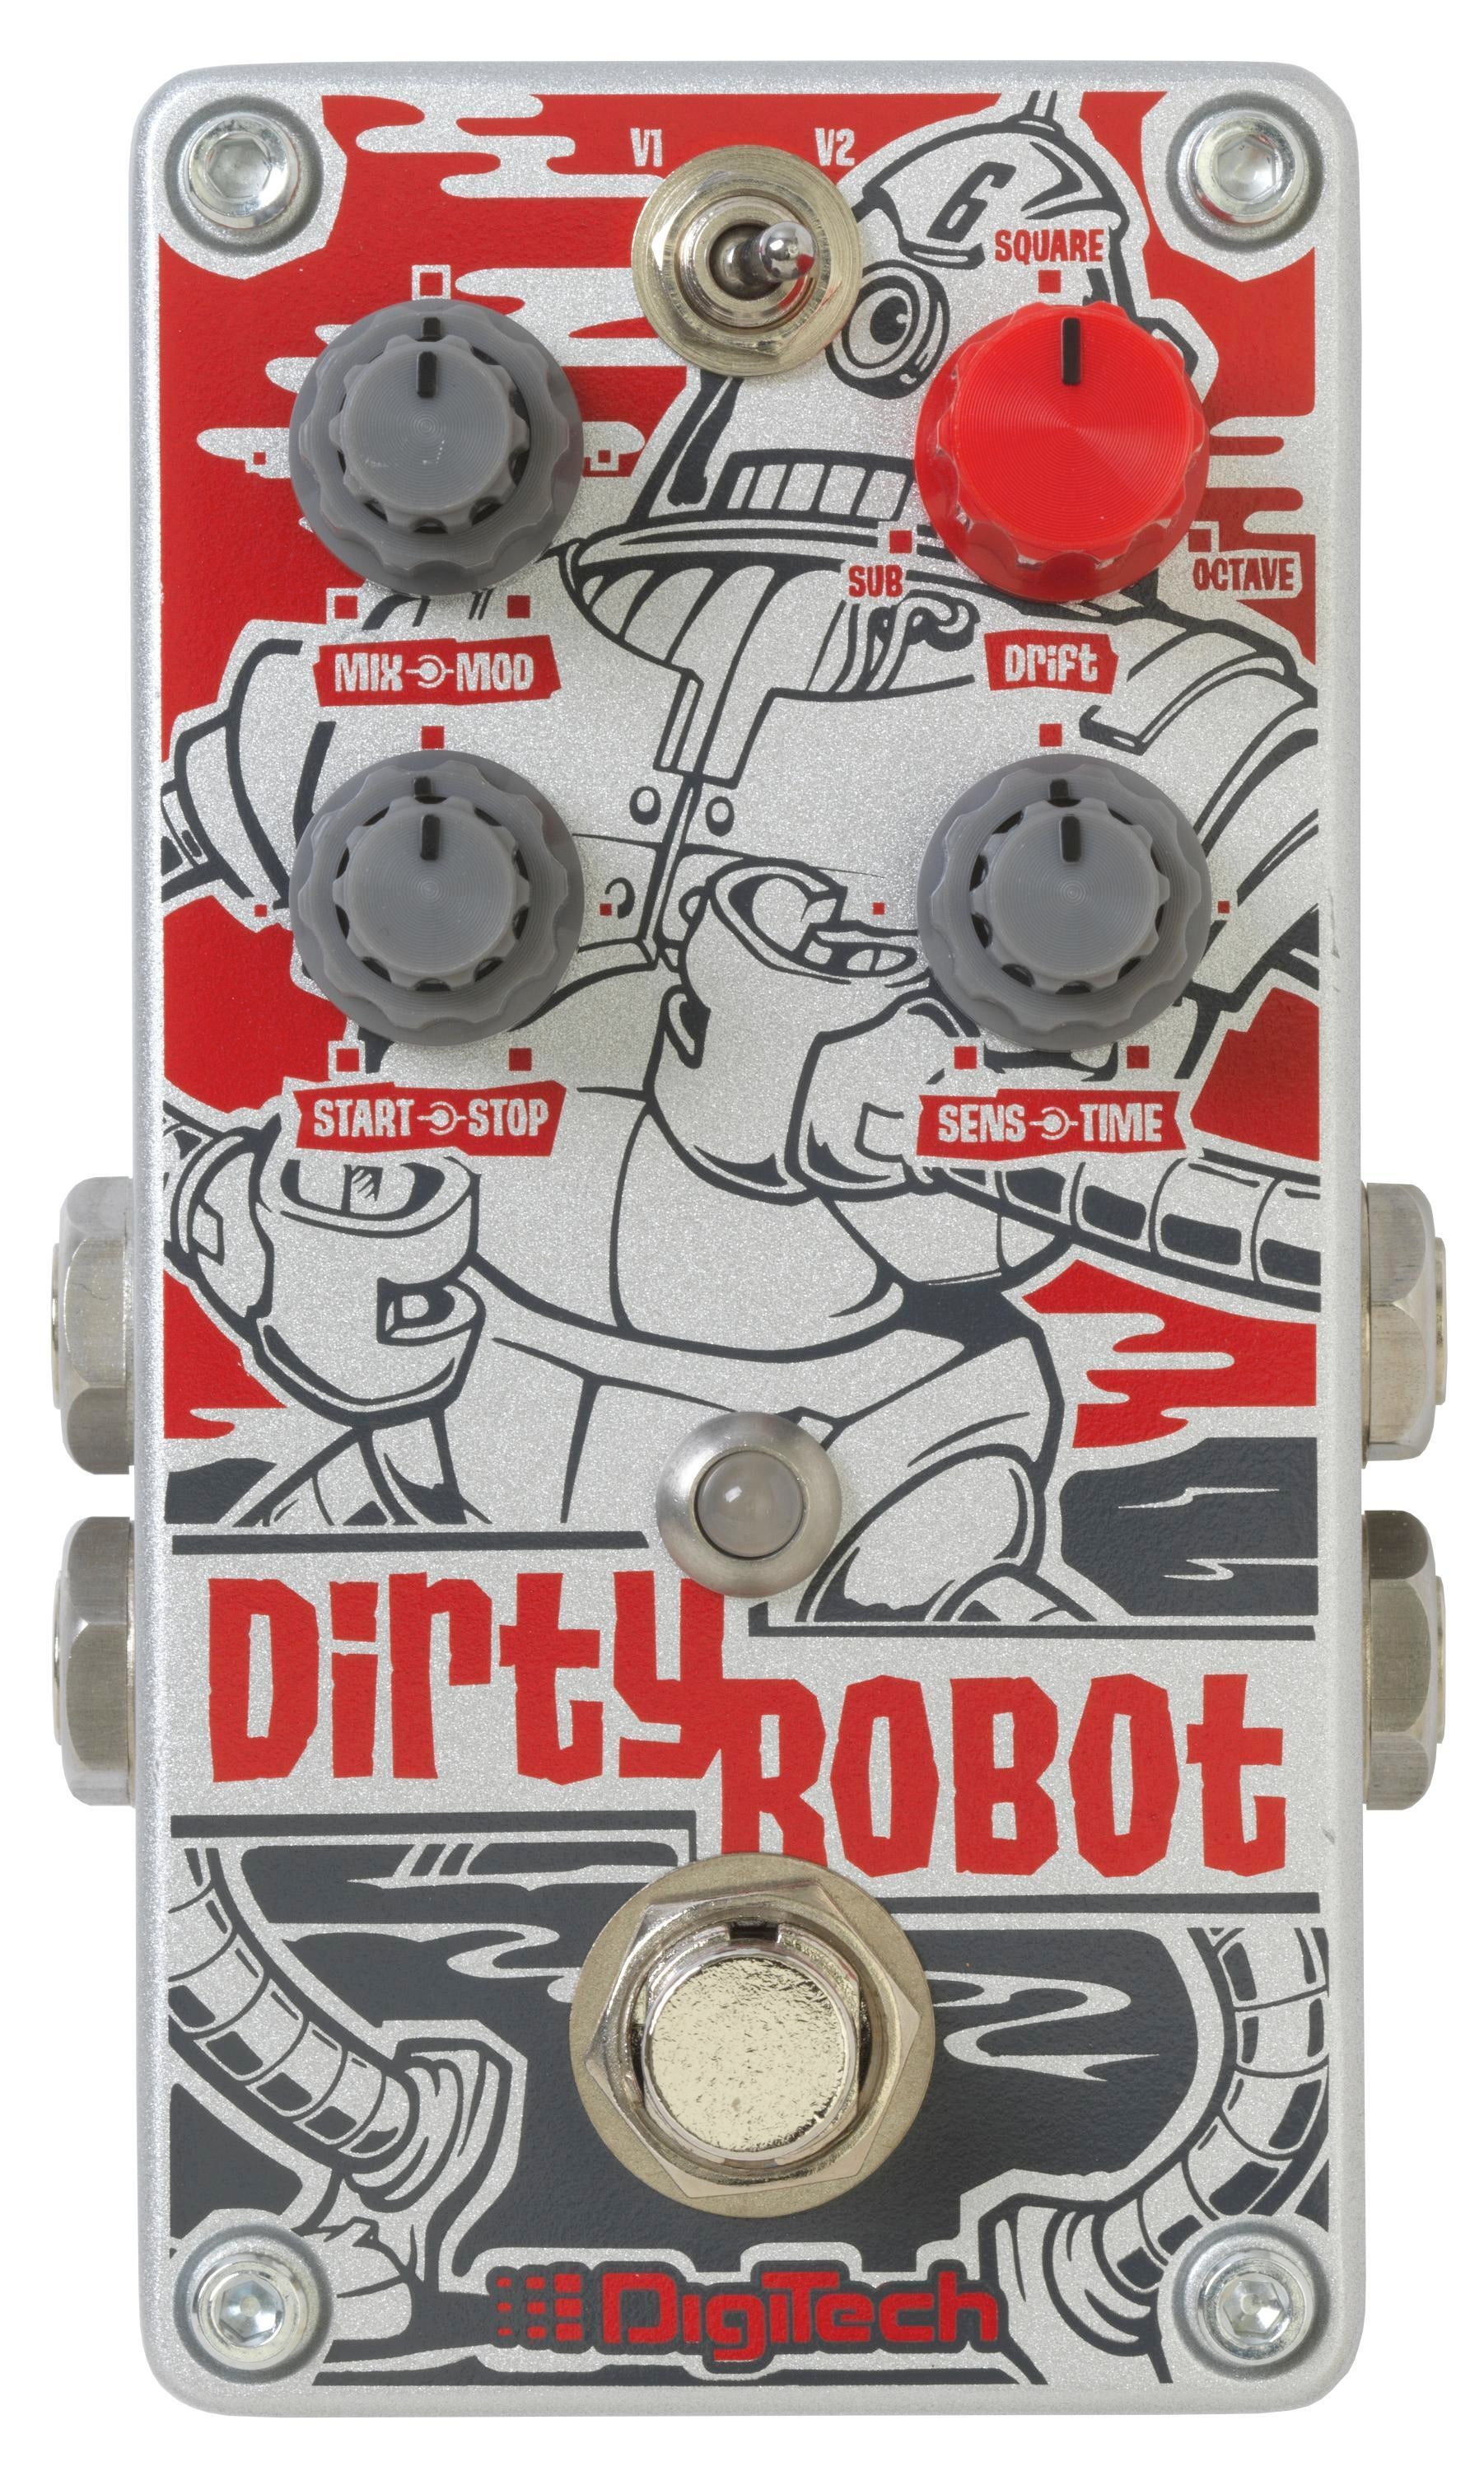 DigiTech DirtyRobot Stereo Mini Synth Pedal | Sweetwater